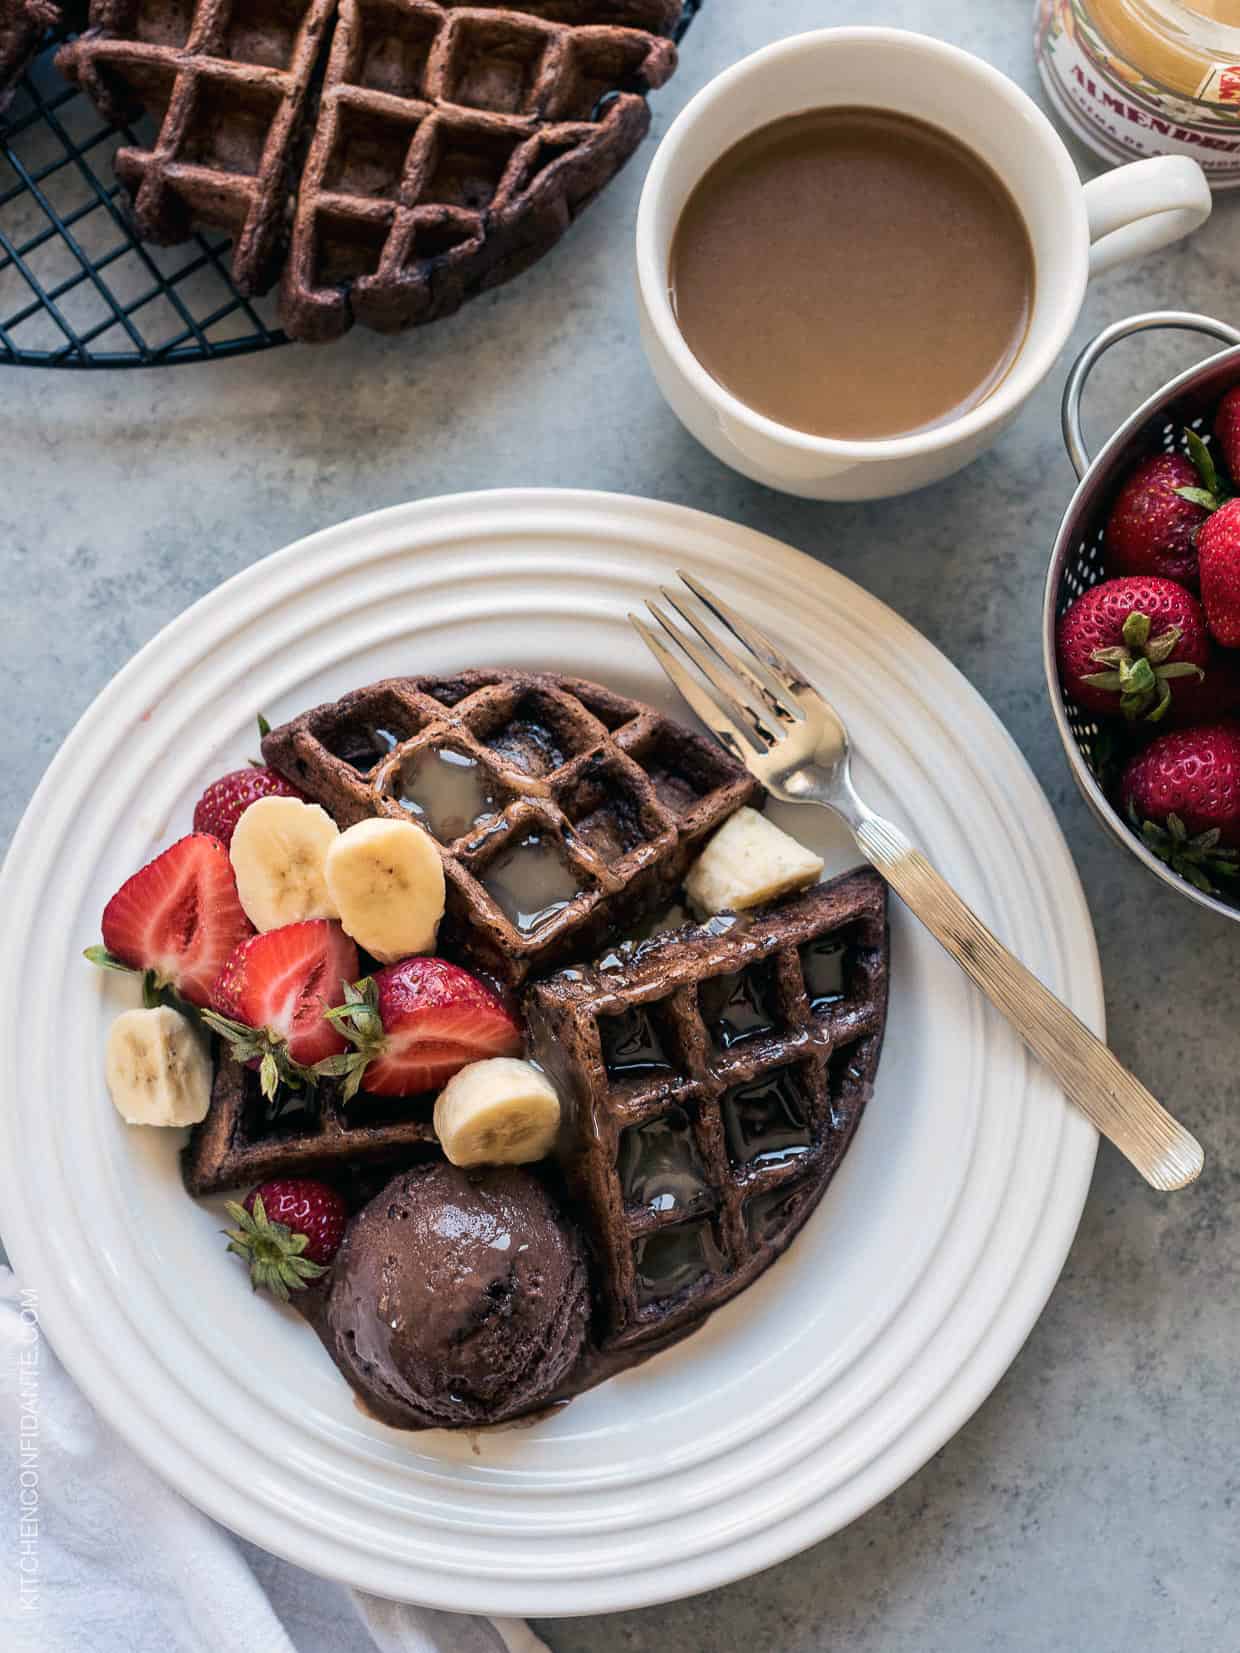 Chocolate Zucchini Belgian Waffles served on a white plate with a scoop of chocolate ice cream, syrup, and fresh fruit.